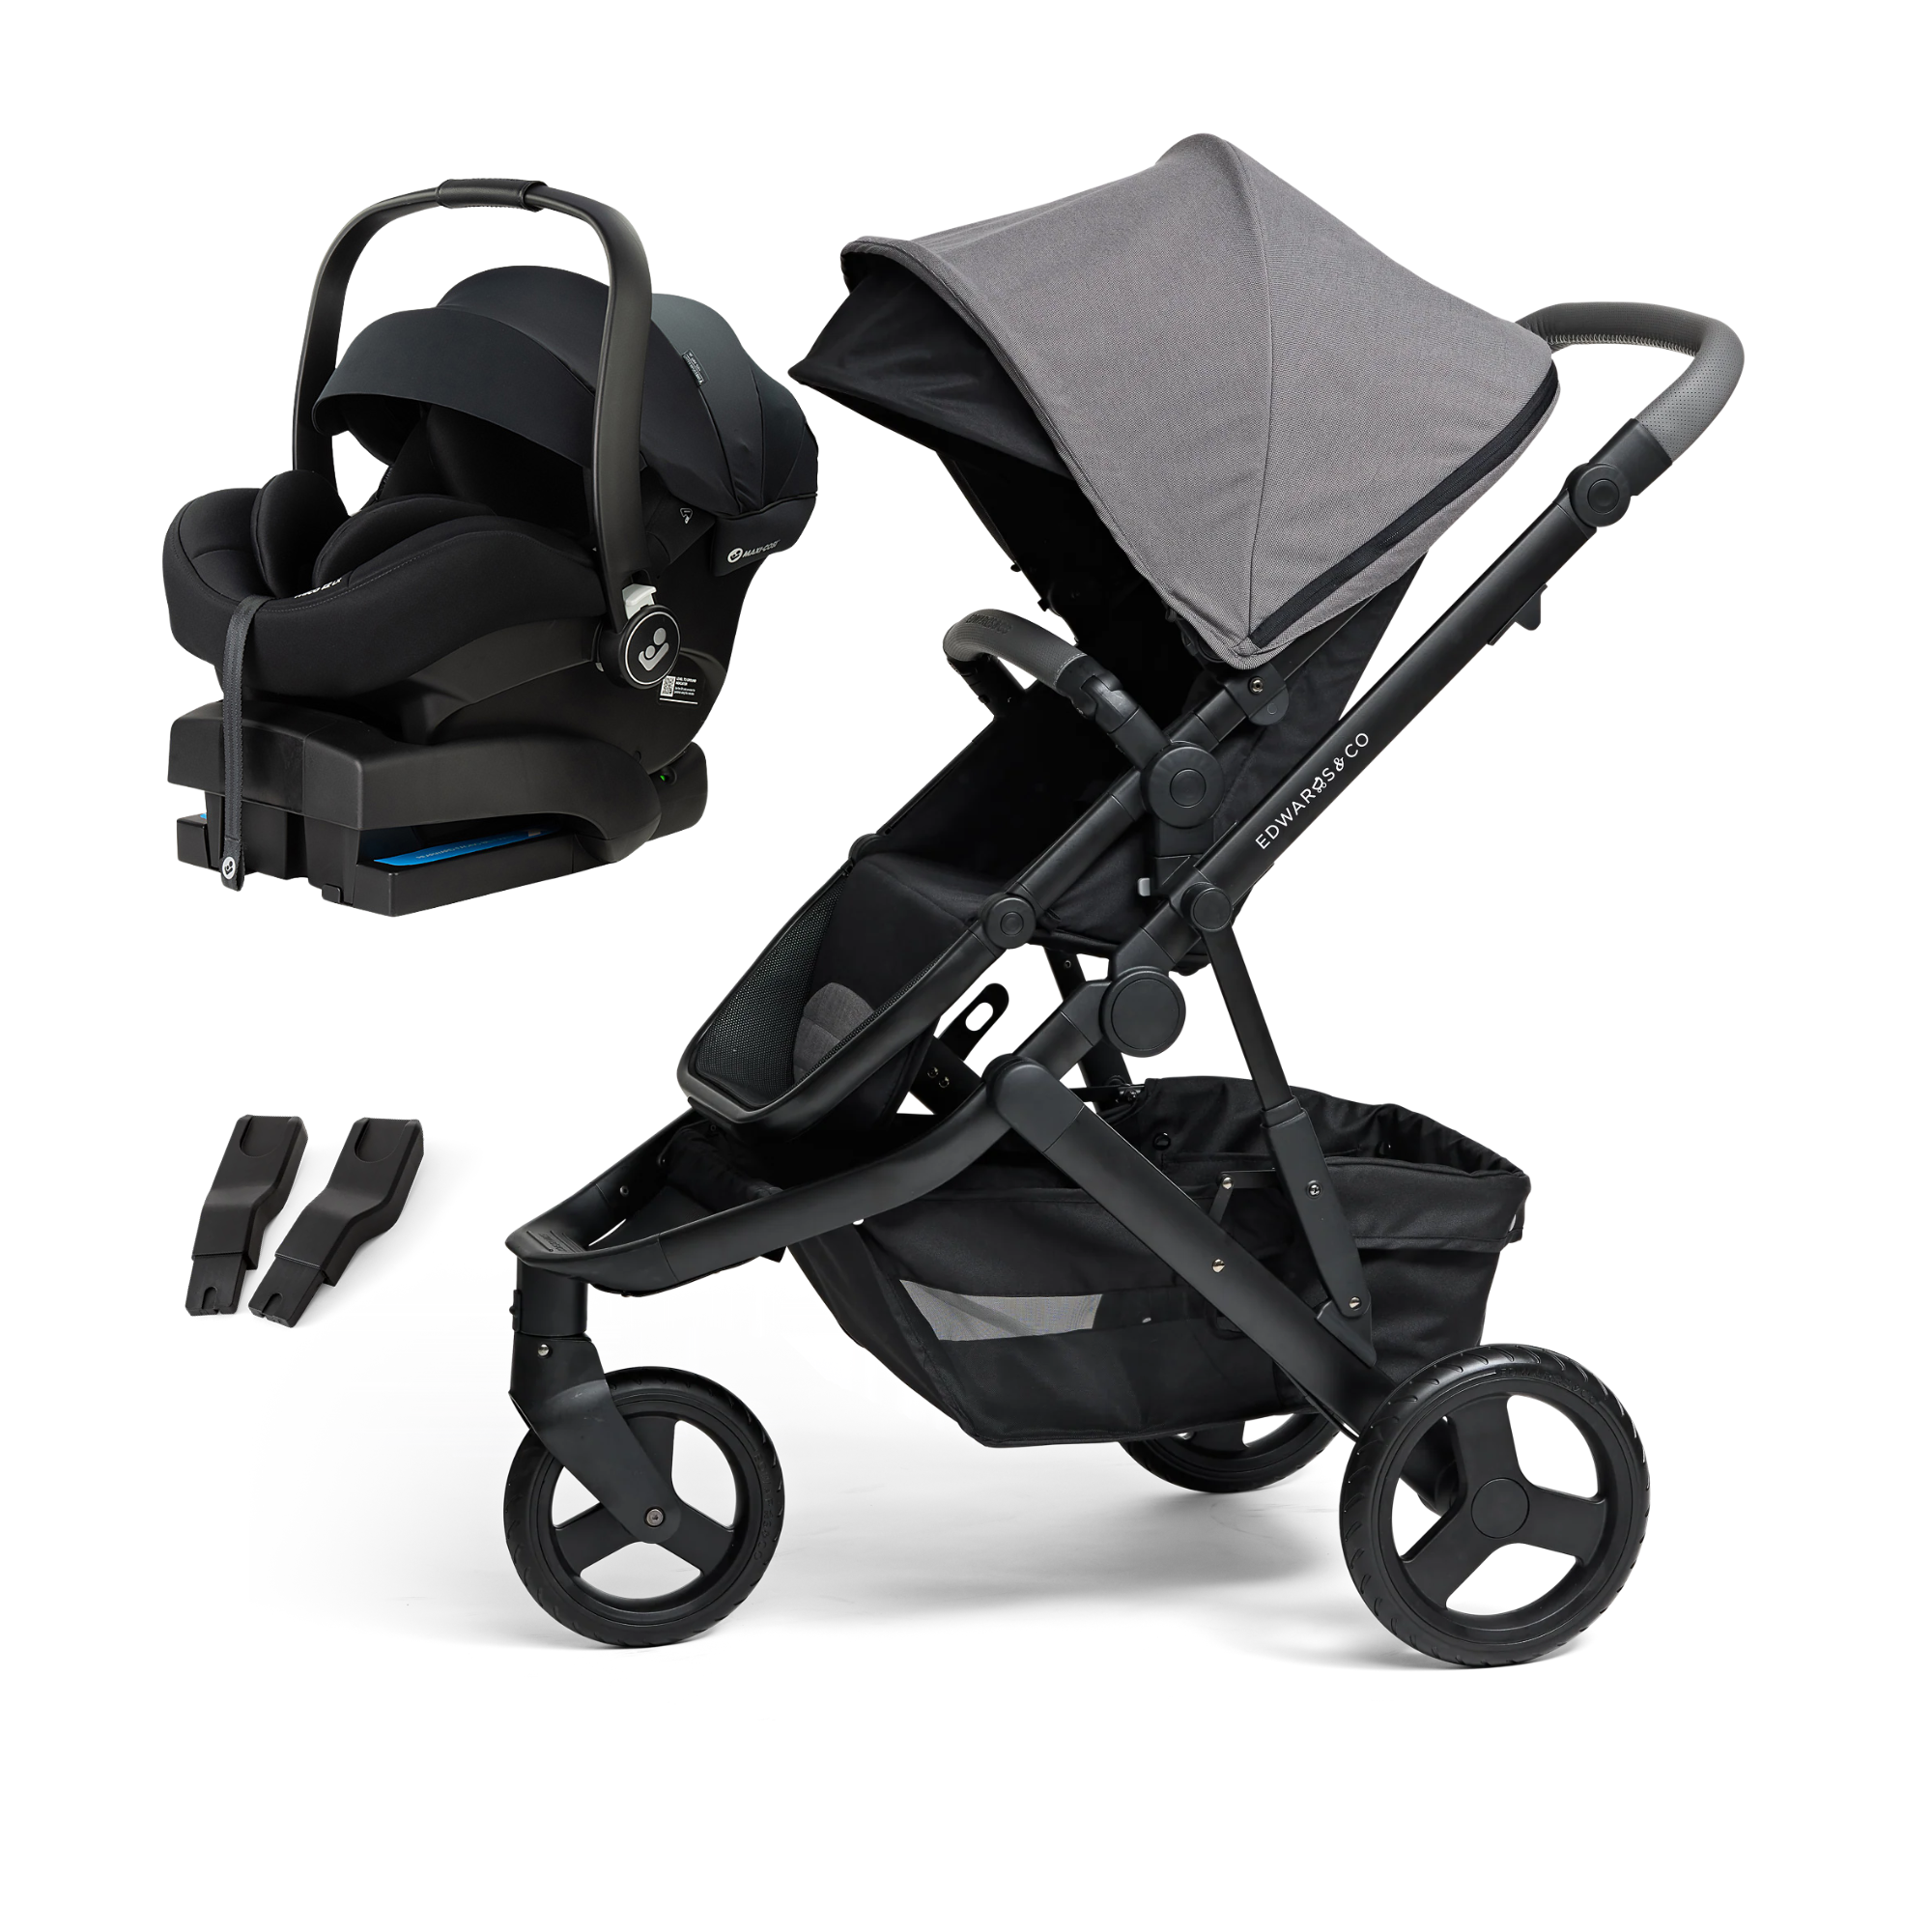 Edwards & Co Oscar M2 Travel System | Maxi Cosi Mico 12 LX Capsule (sale ends 21/6) - Tiny Tots Baby Store 